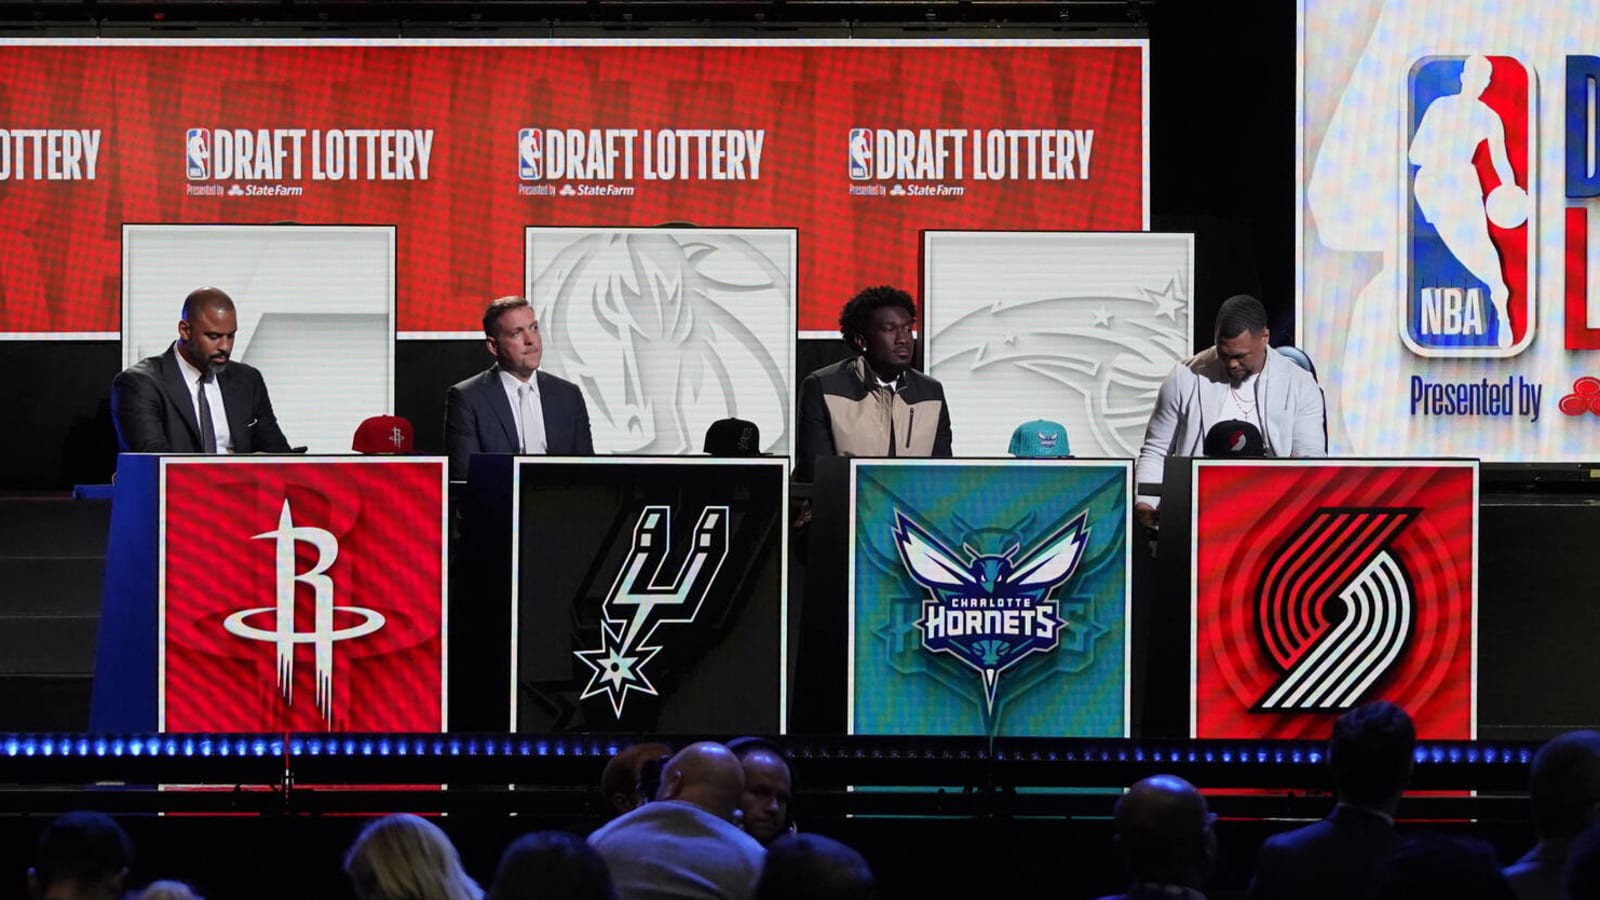 Spurs weren't the only big winners in the draft lottery